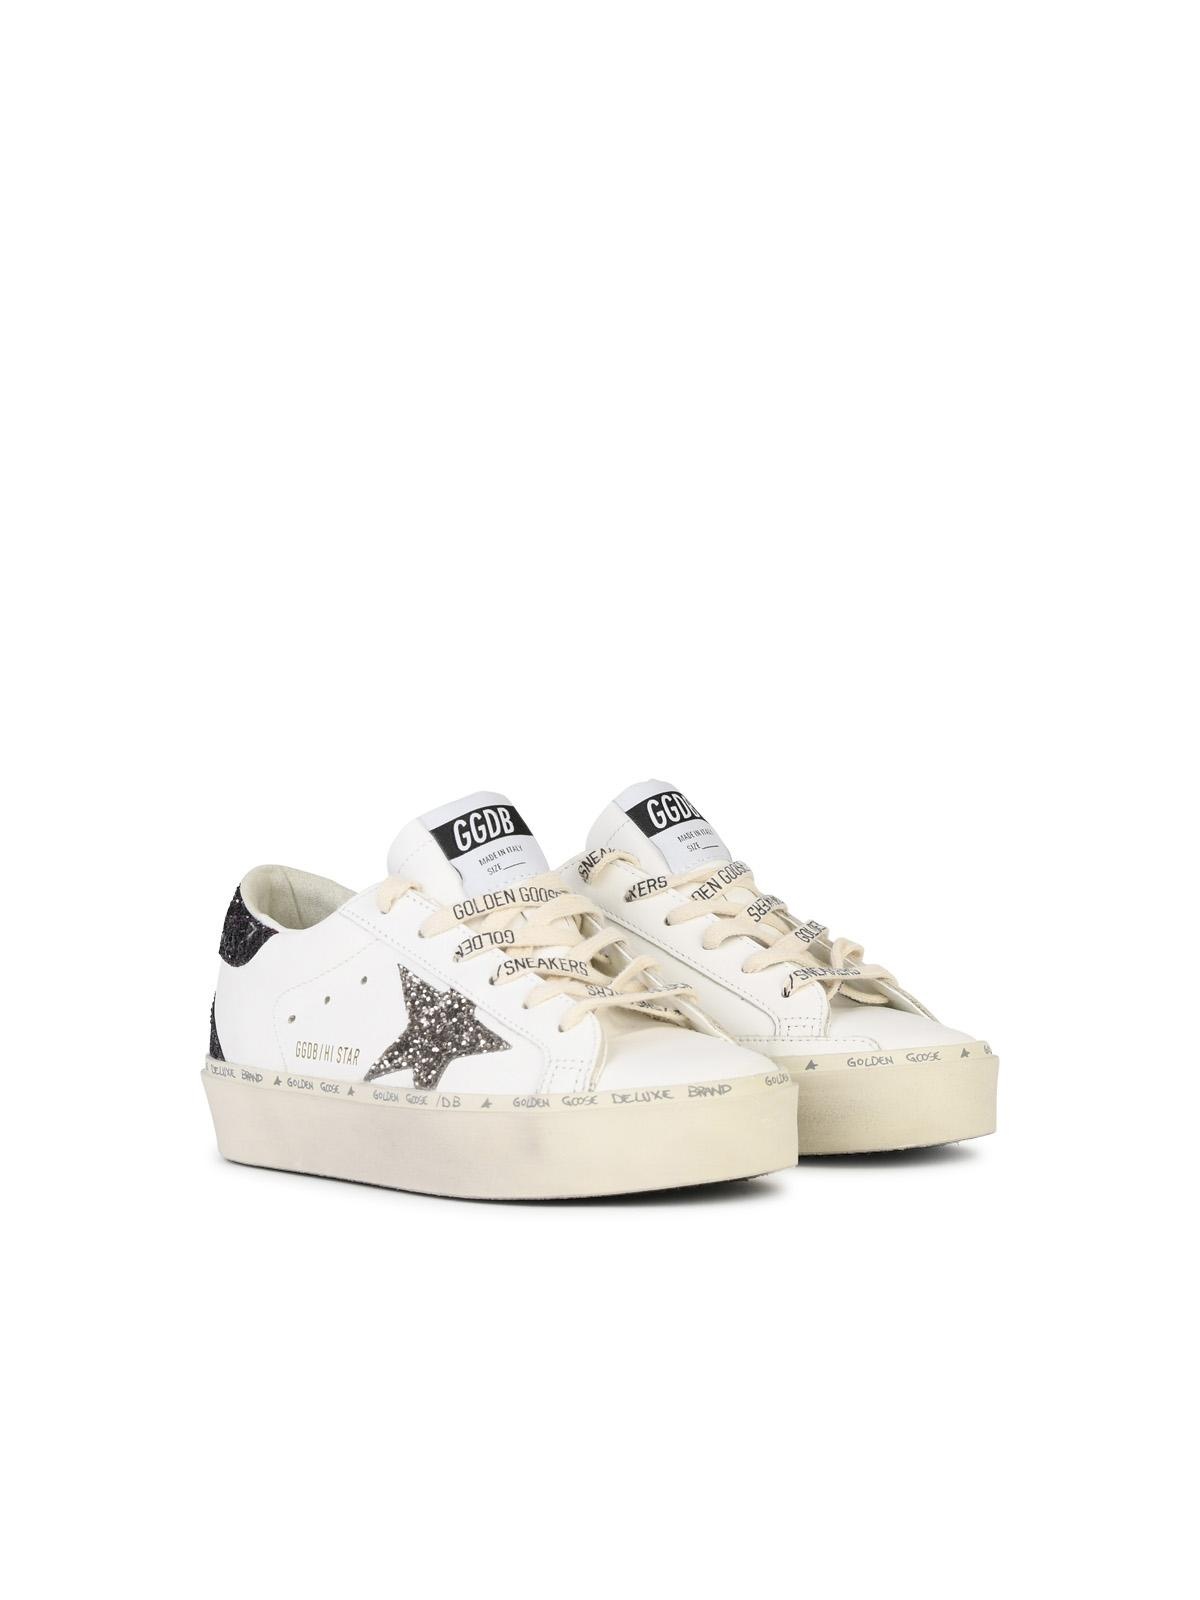 Golden Goose 'Hi Star' White Leather Sneakers Woman - 2